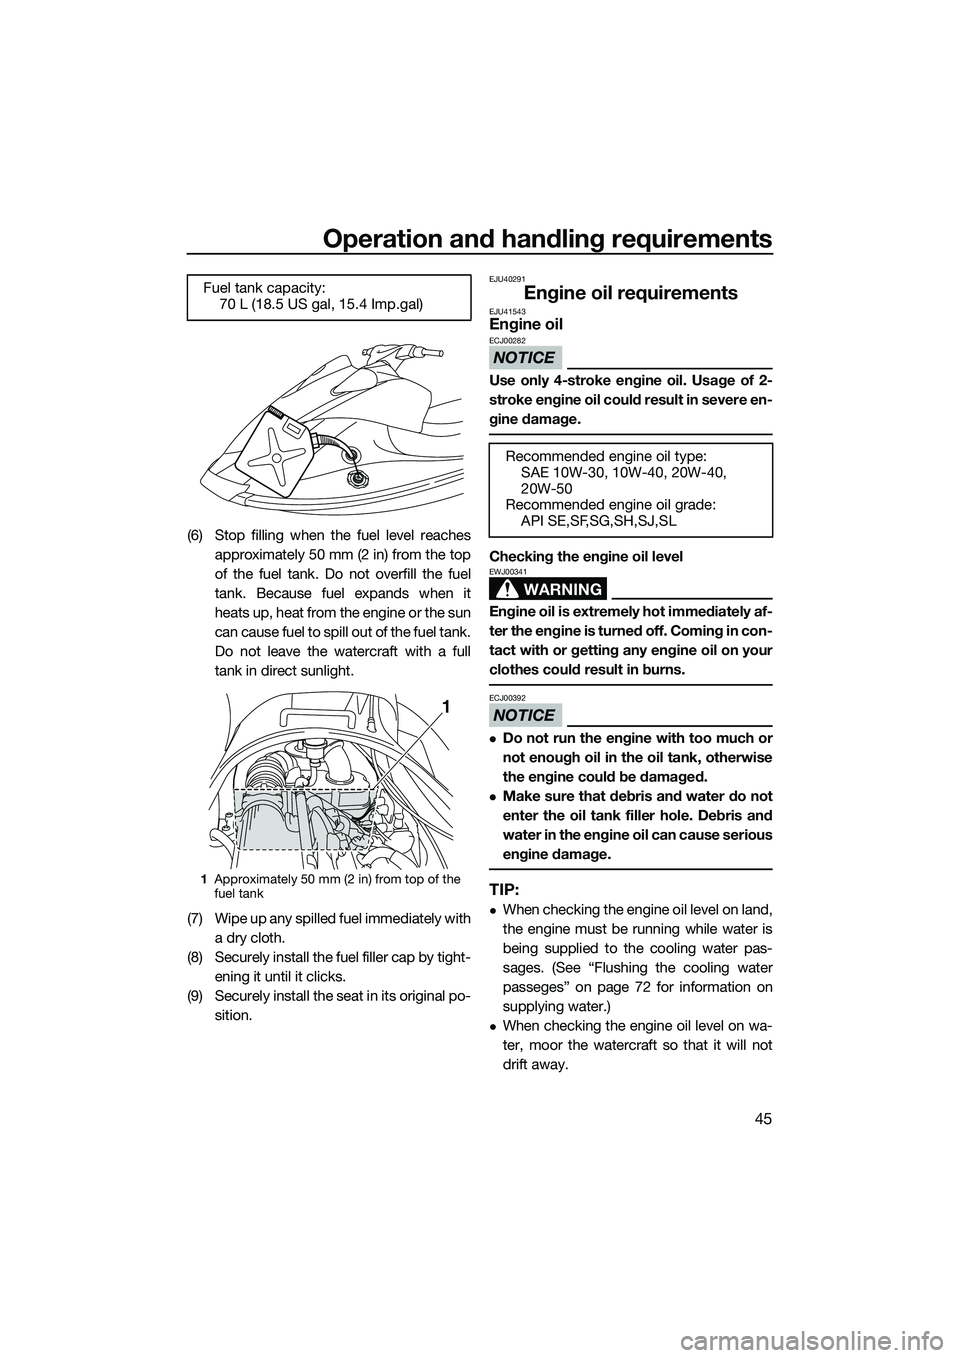 YAMAHA VX CRUISER 2014  Owners Manual Operation and handling requirements
45
(6) Stop filling when the fuel level reachesapproximately 50 mm (2 in) from the top
of the fuel tank. Do not overfill the fuel
tank. Because fuel expands when it